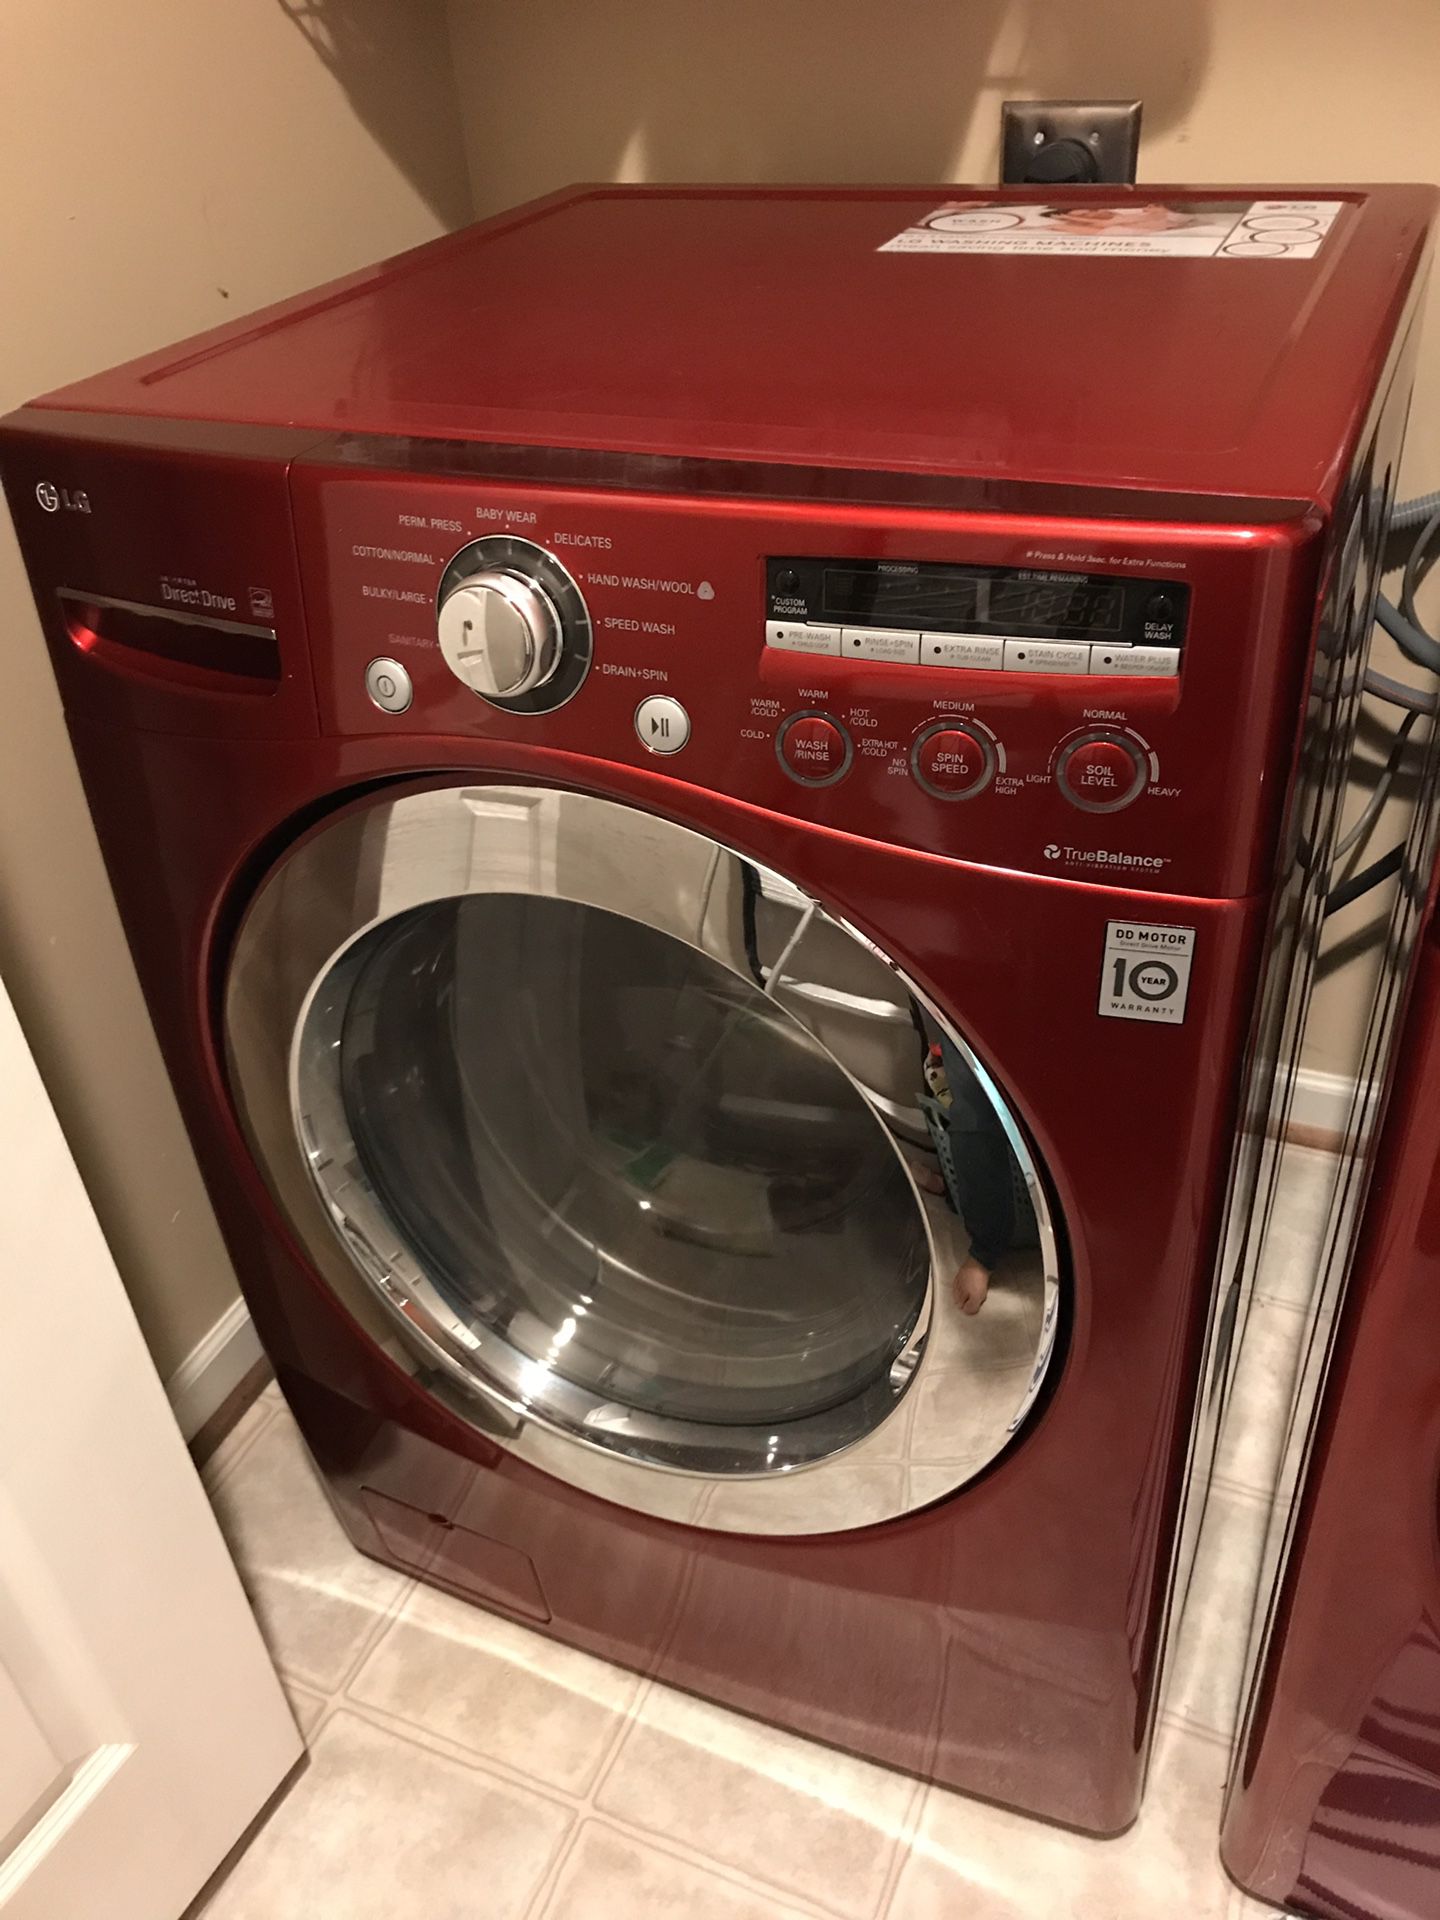 LG front load washer (error code PE need repair) FREE pick up at Williamsburg It displays the error PE need to repair. Pick up only Condition: